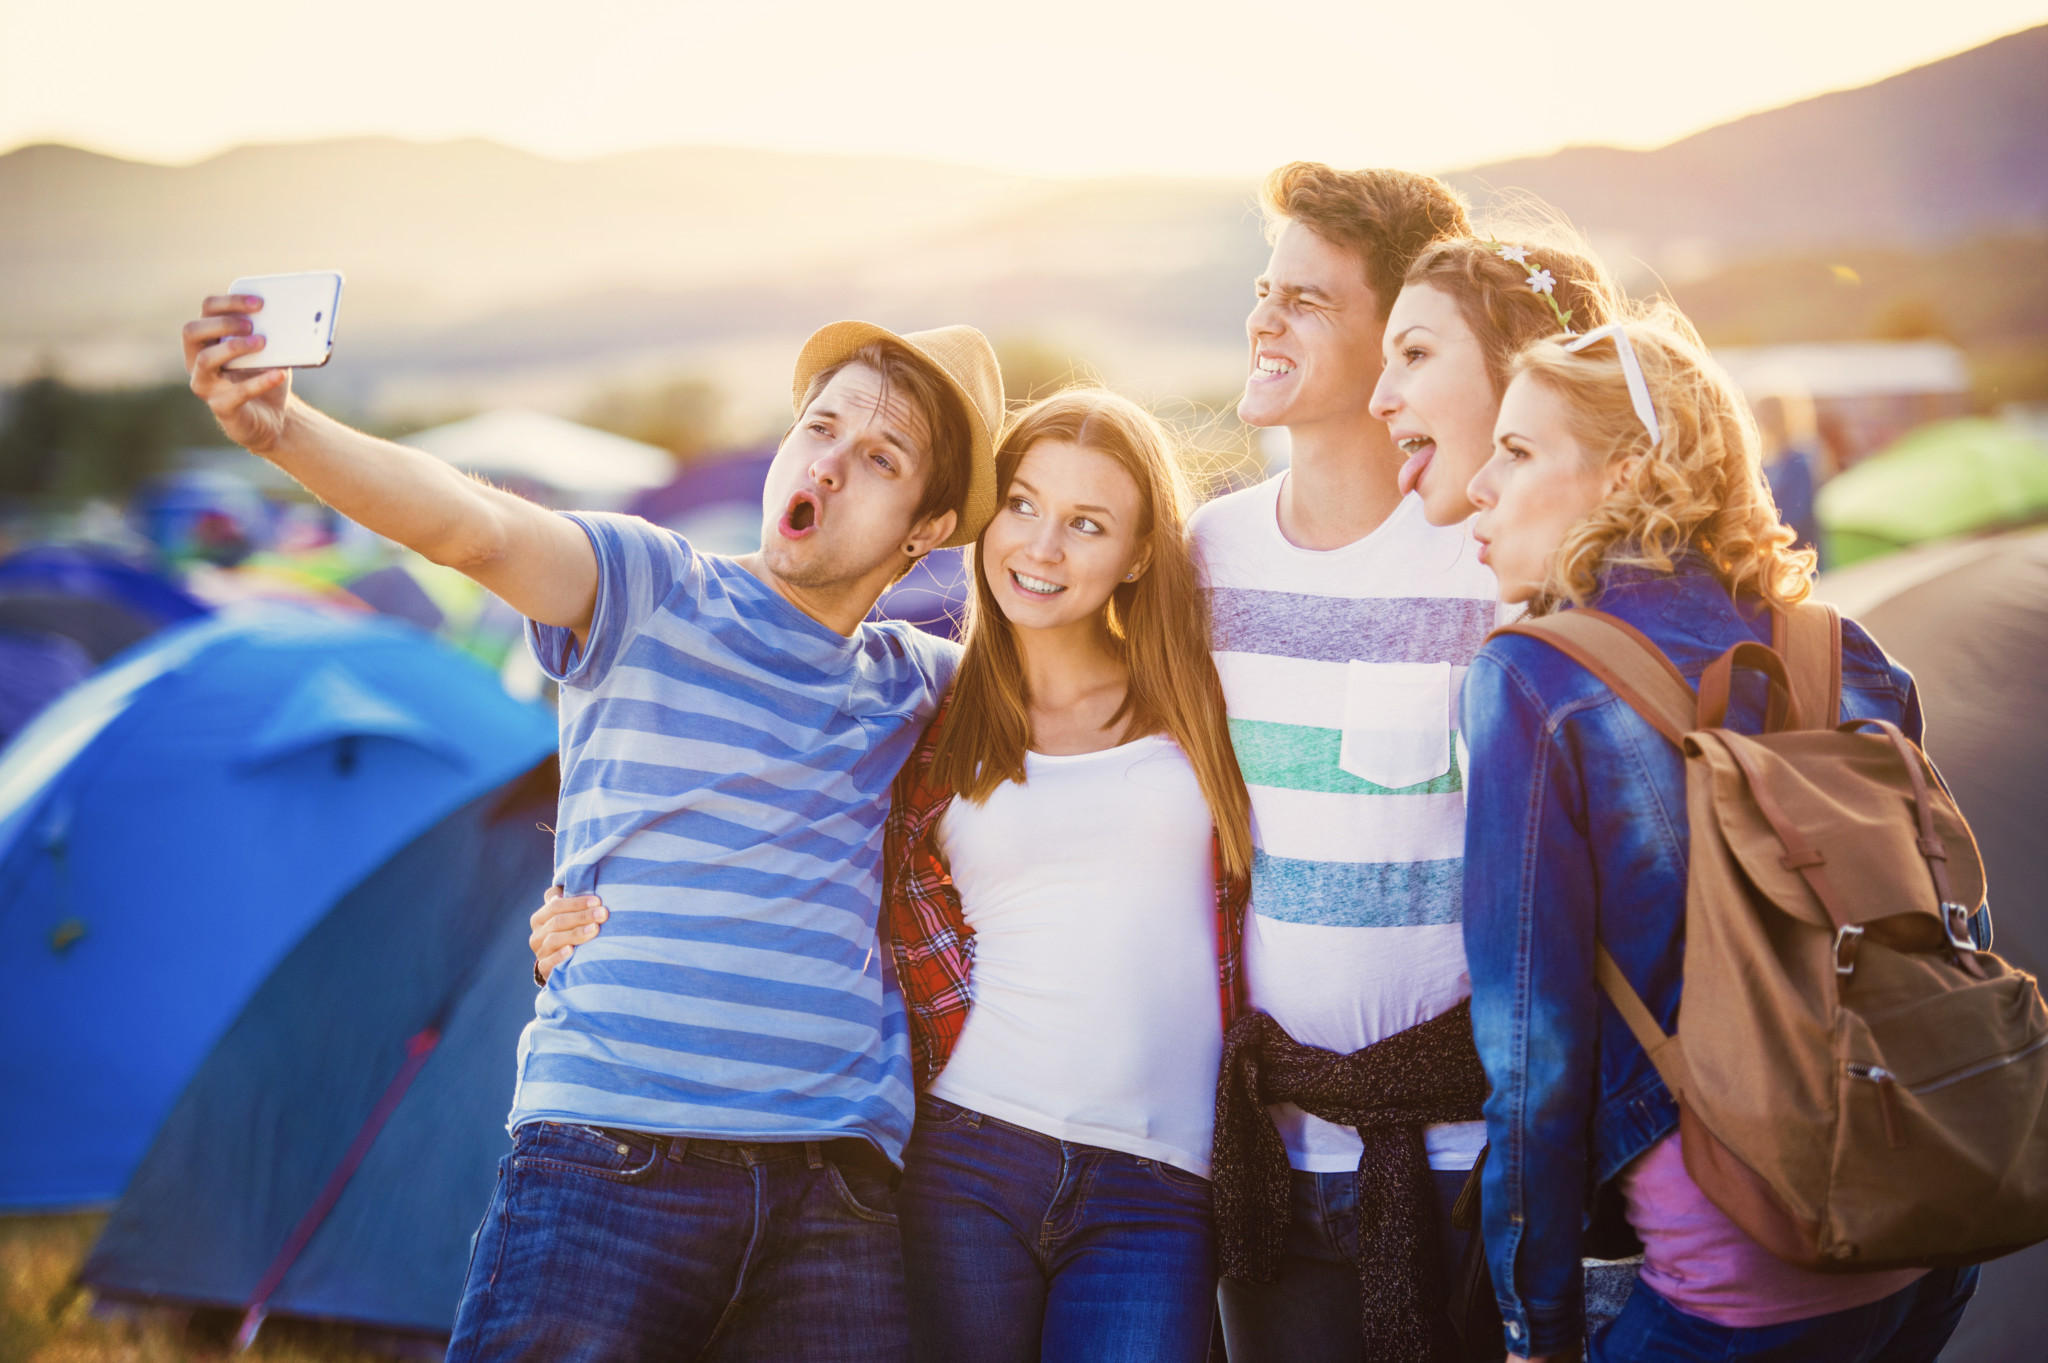 Teens at summer festival, taking a group selfie